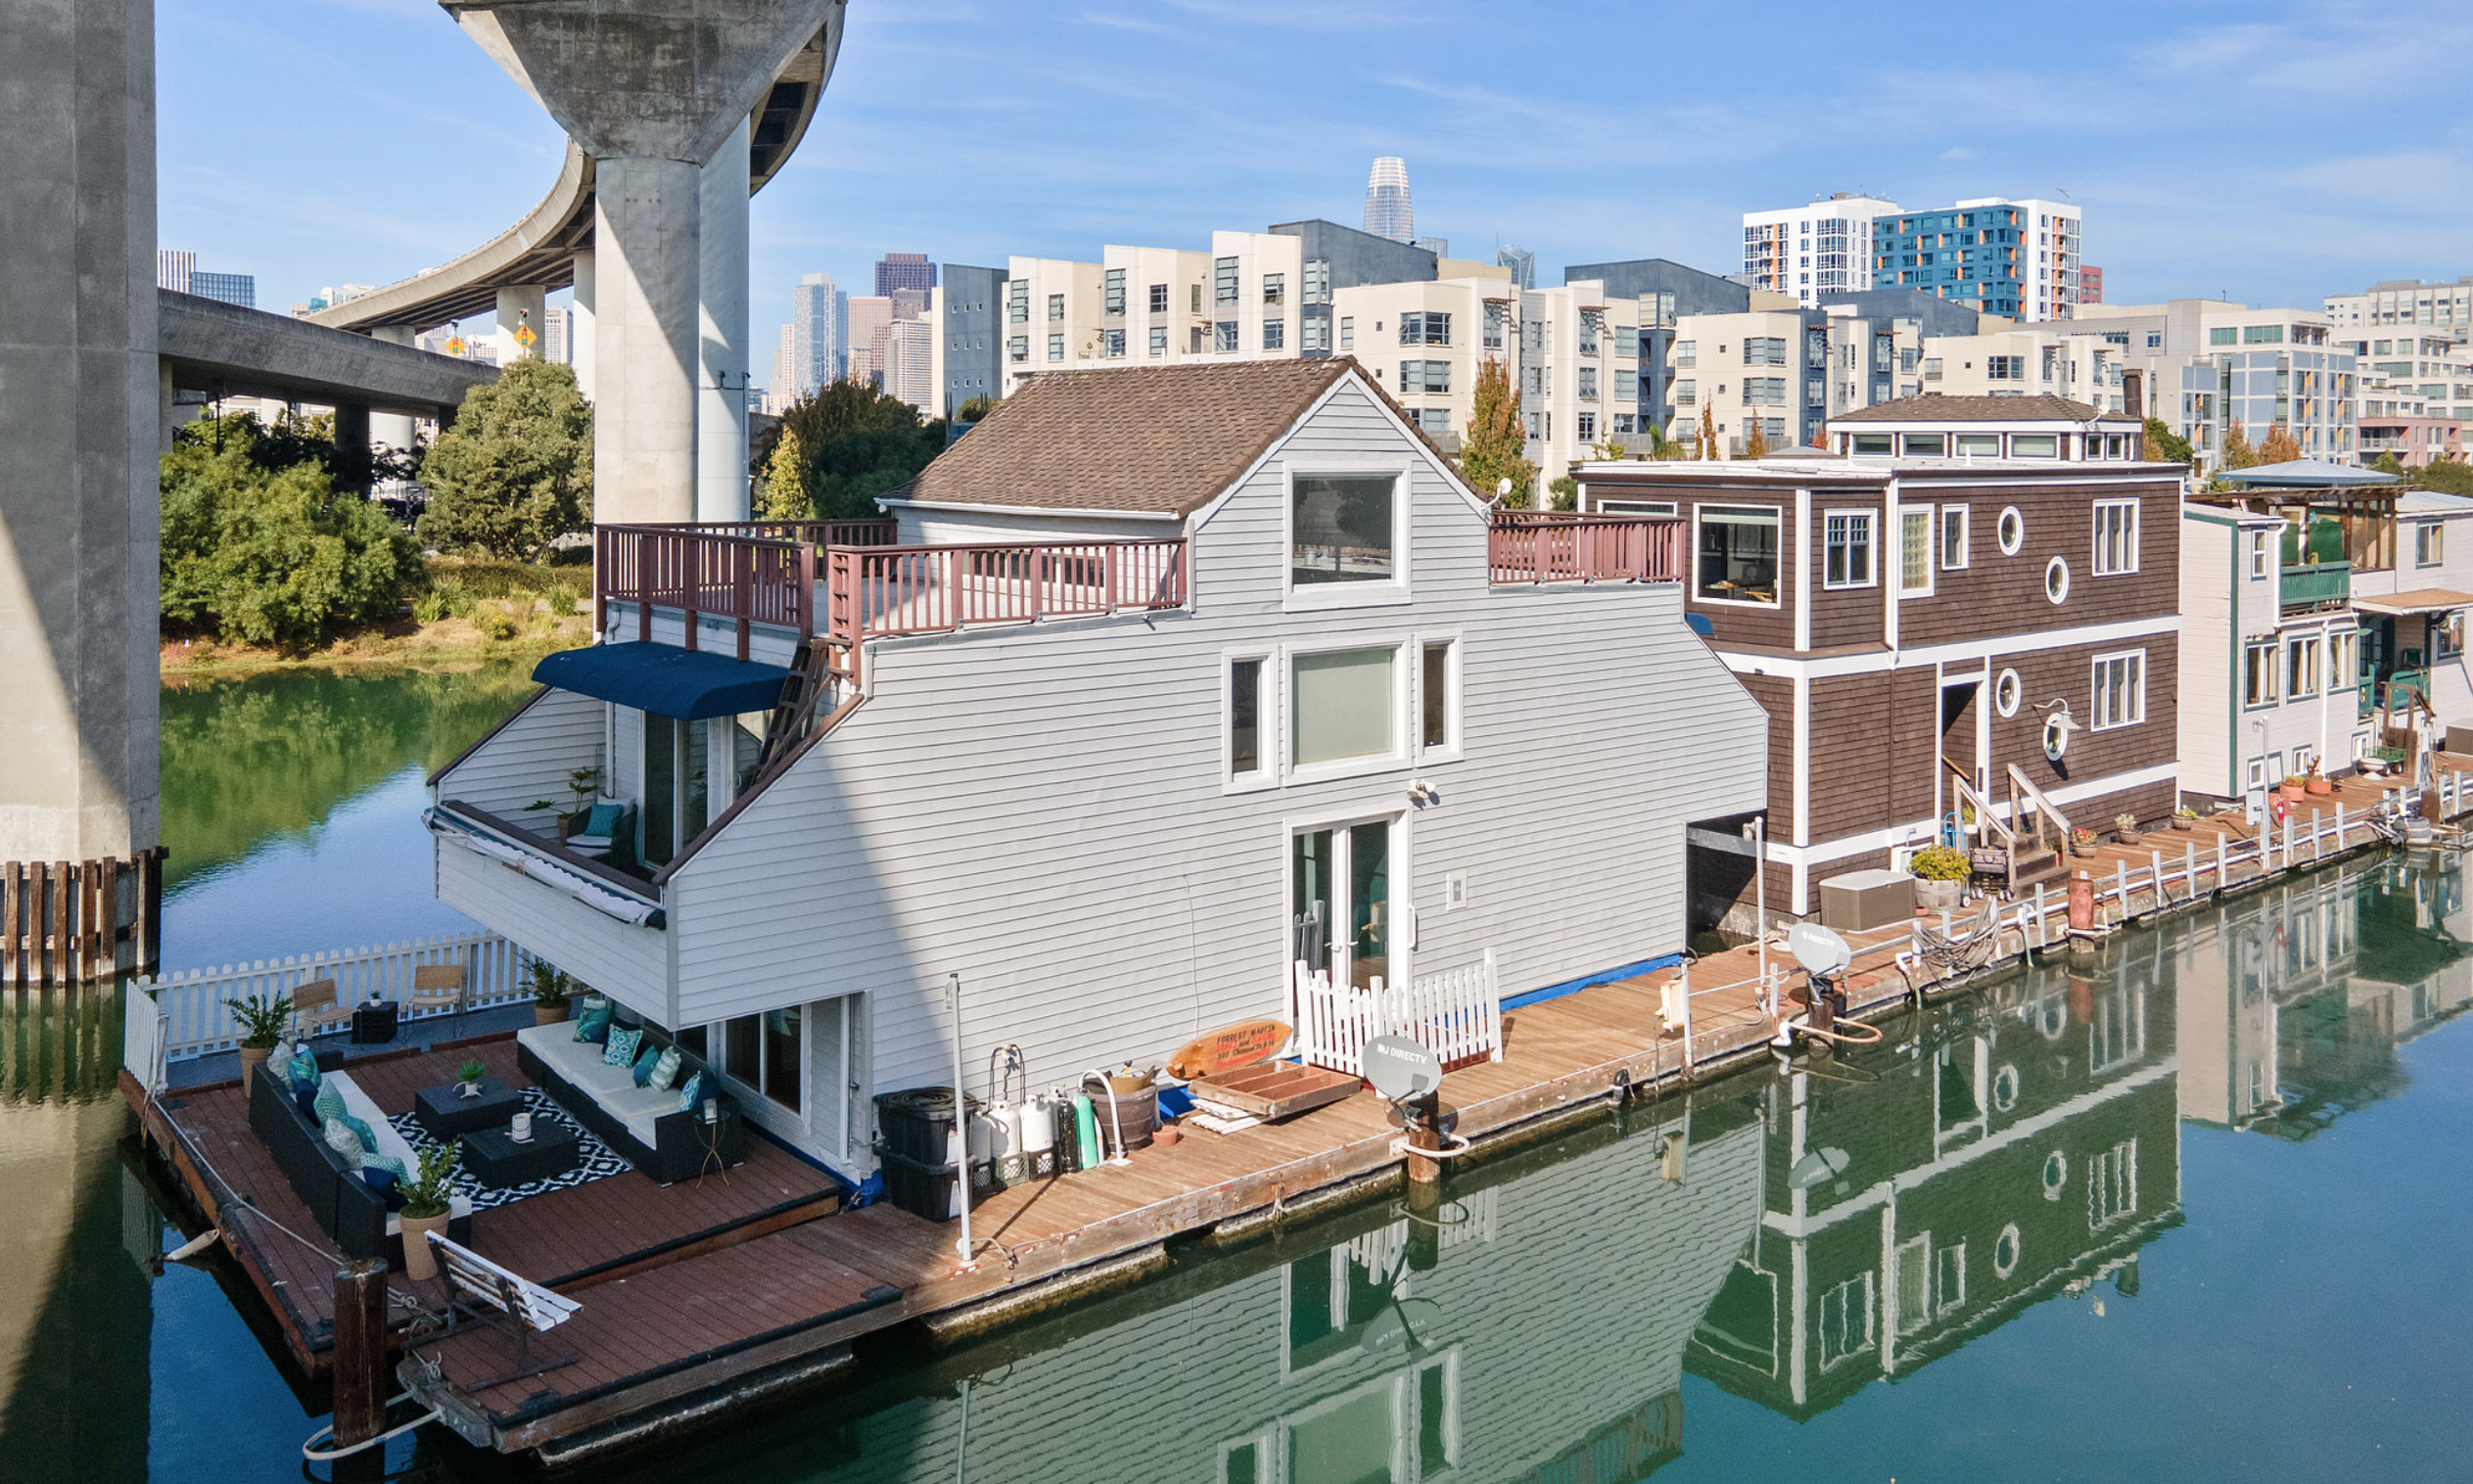 A triangular, gray houseboat sits at the end of a dock in Mission Creek on a sunny day.